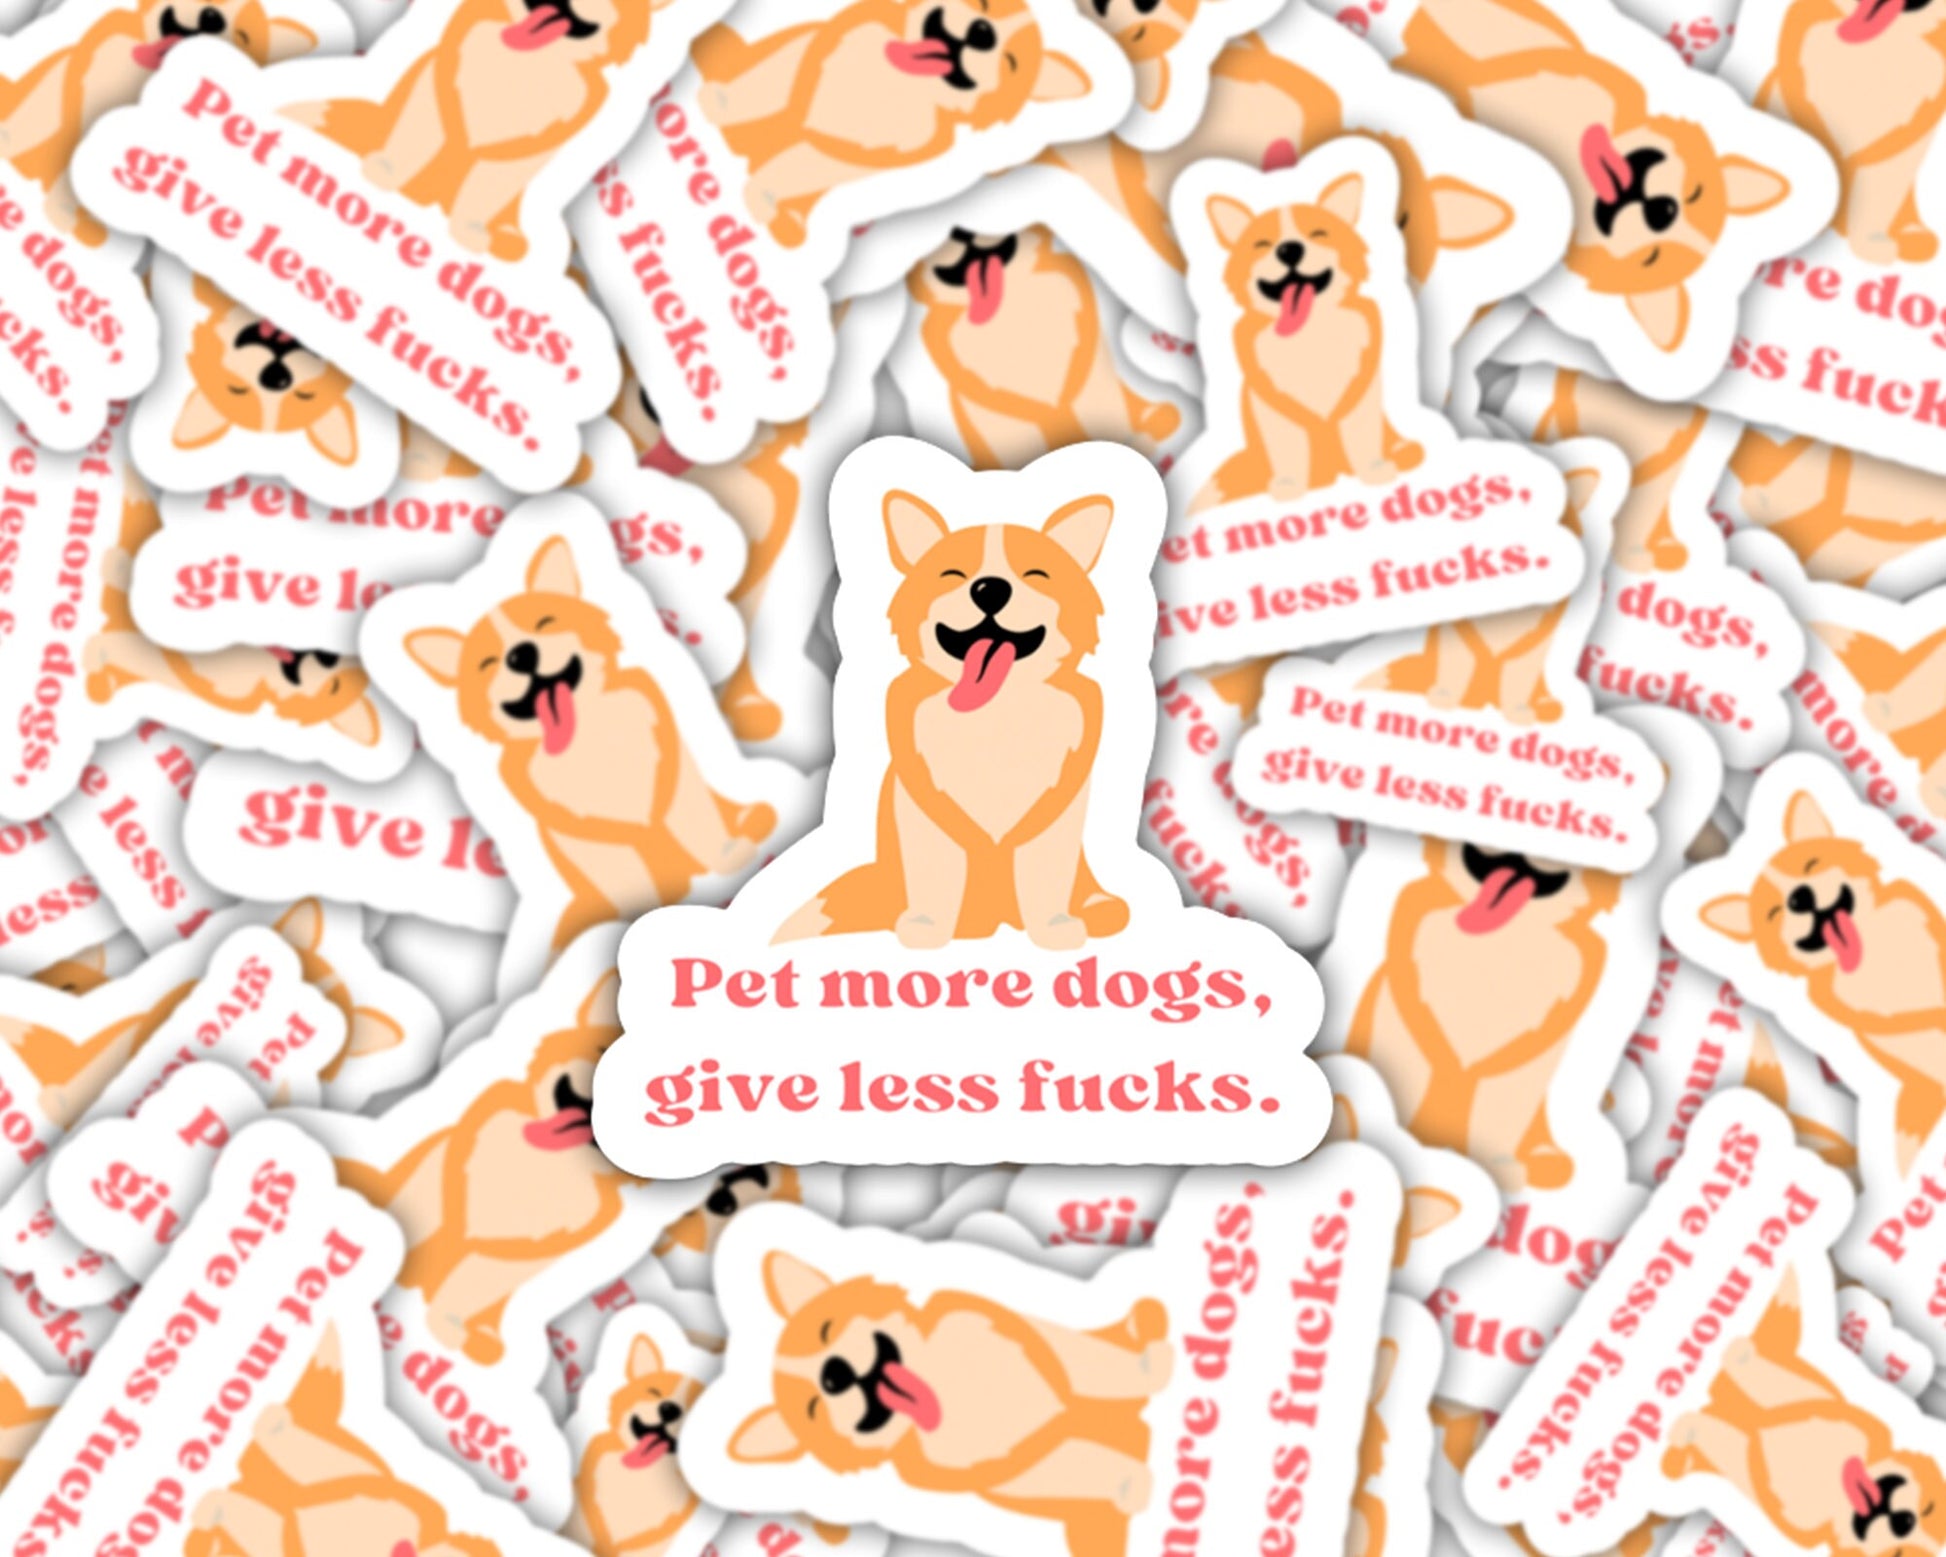 pet more dogs give less fucks, dog stickers, dog lover gifts, pet shop stickers, dog mom, dogs over people, goldendoodle, husky sticker